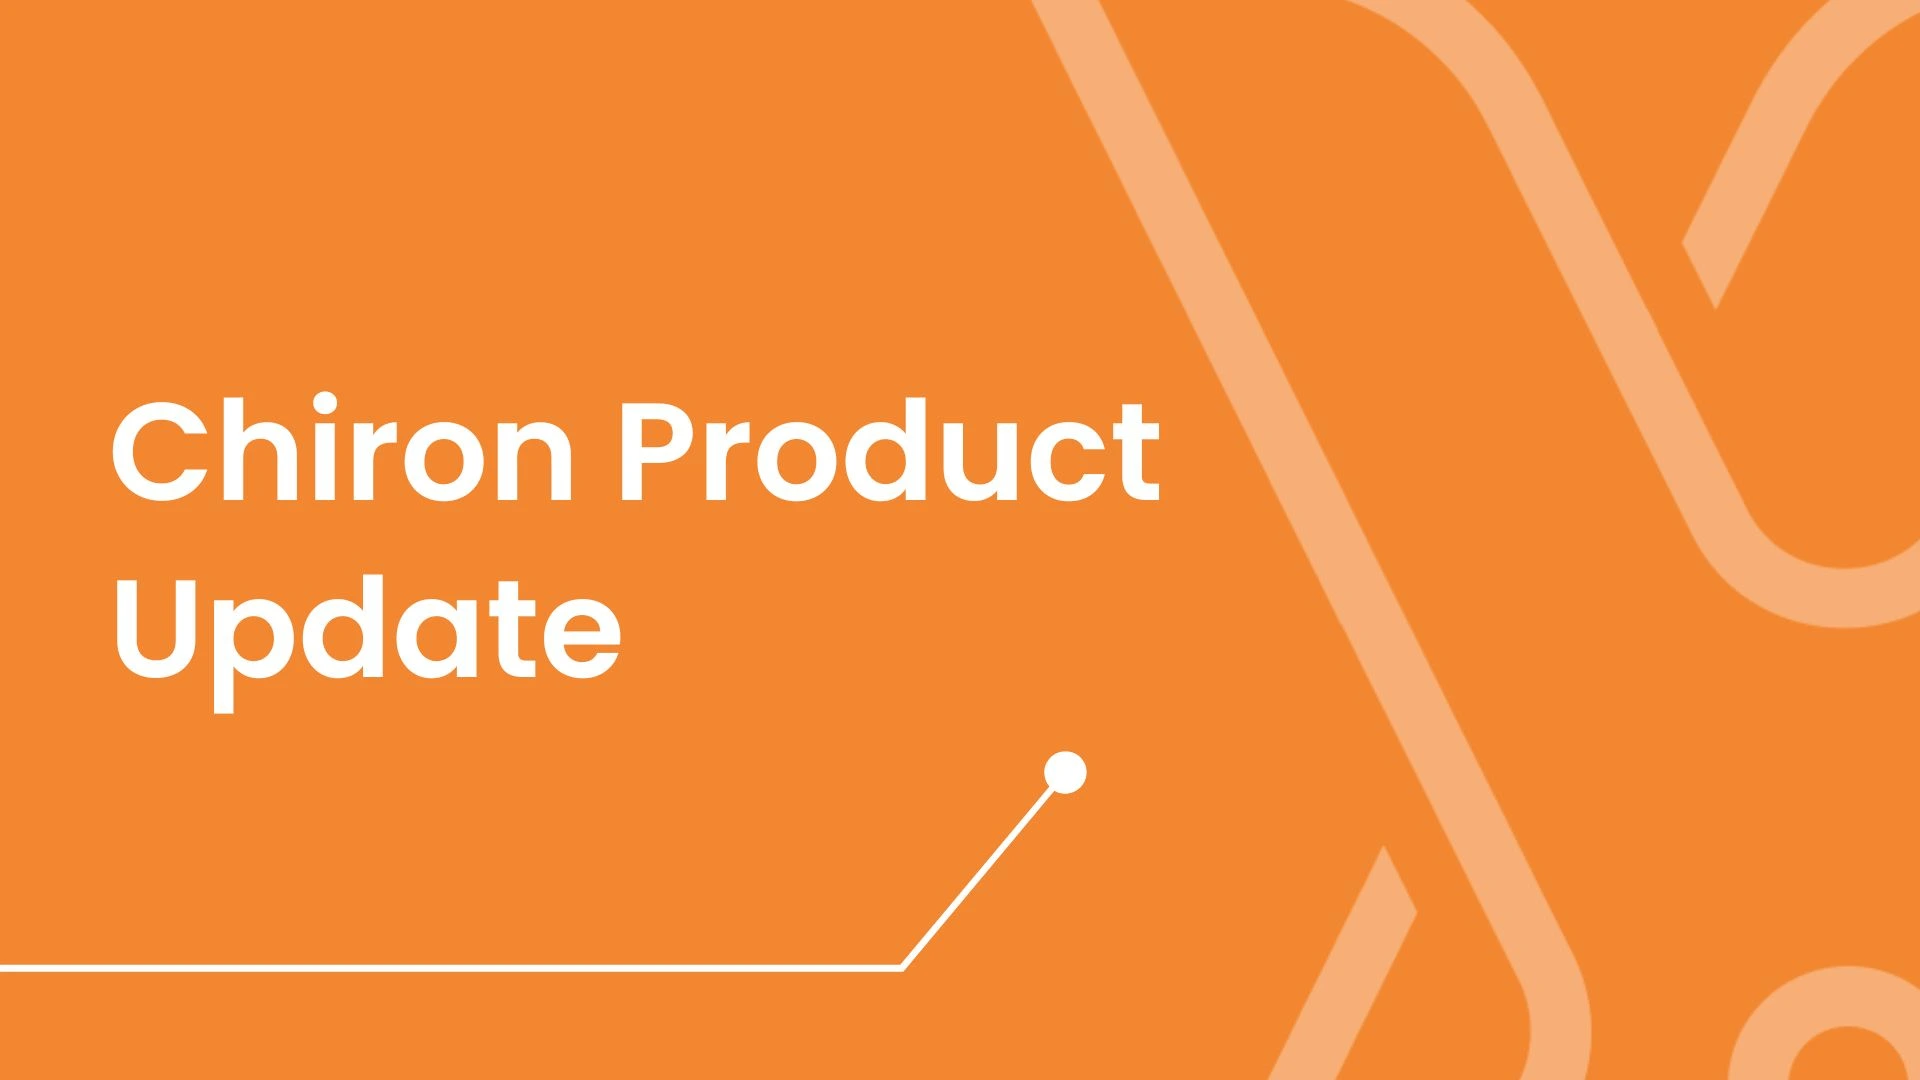 Chiron Product Update 2022